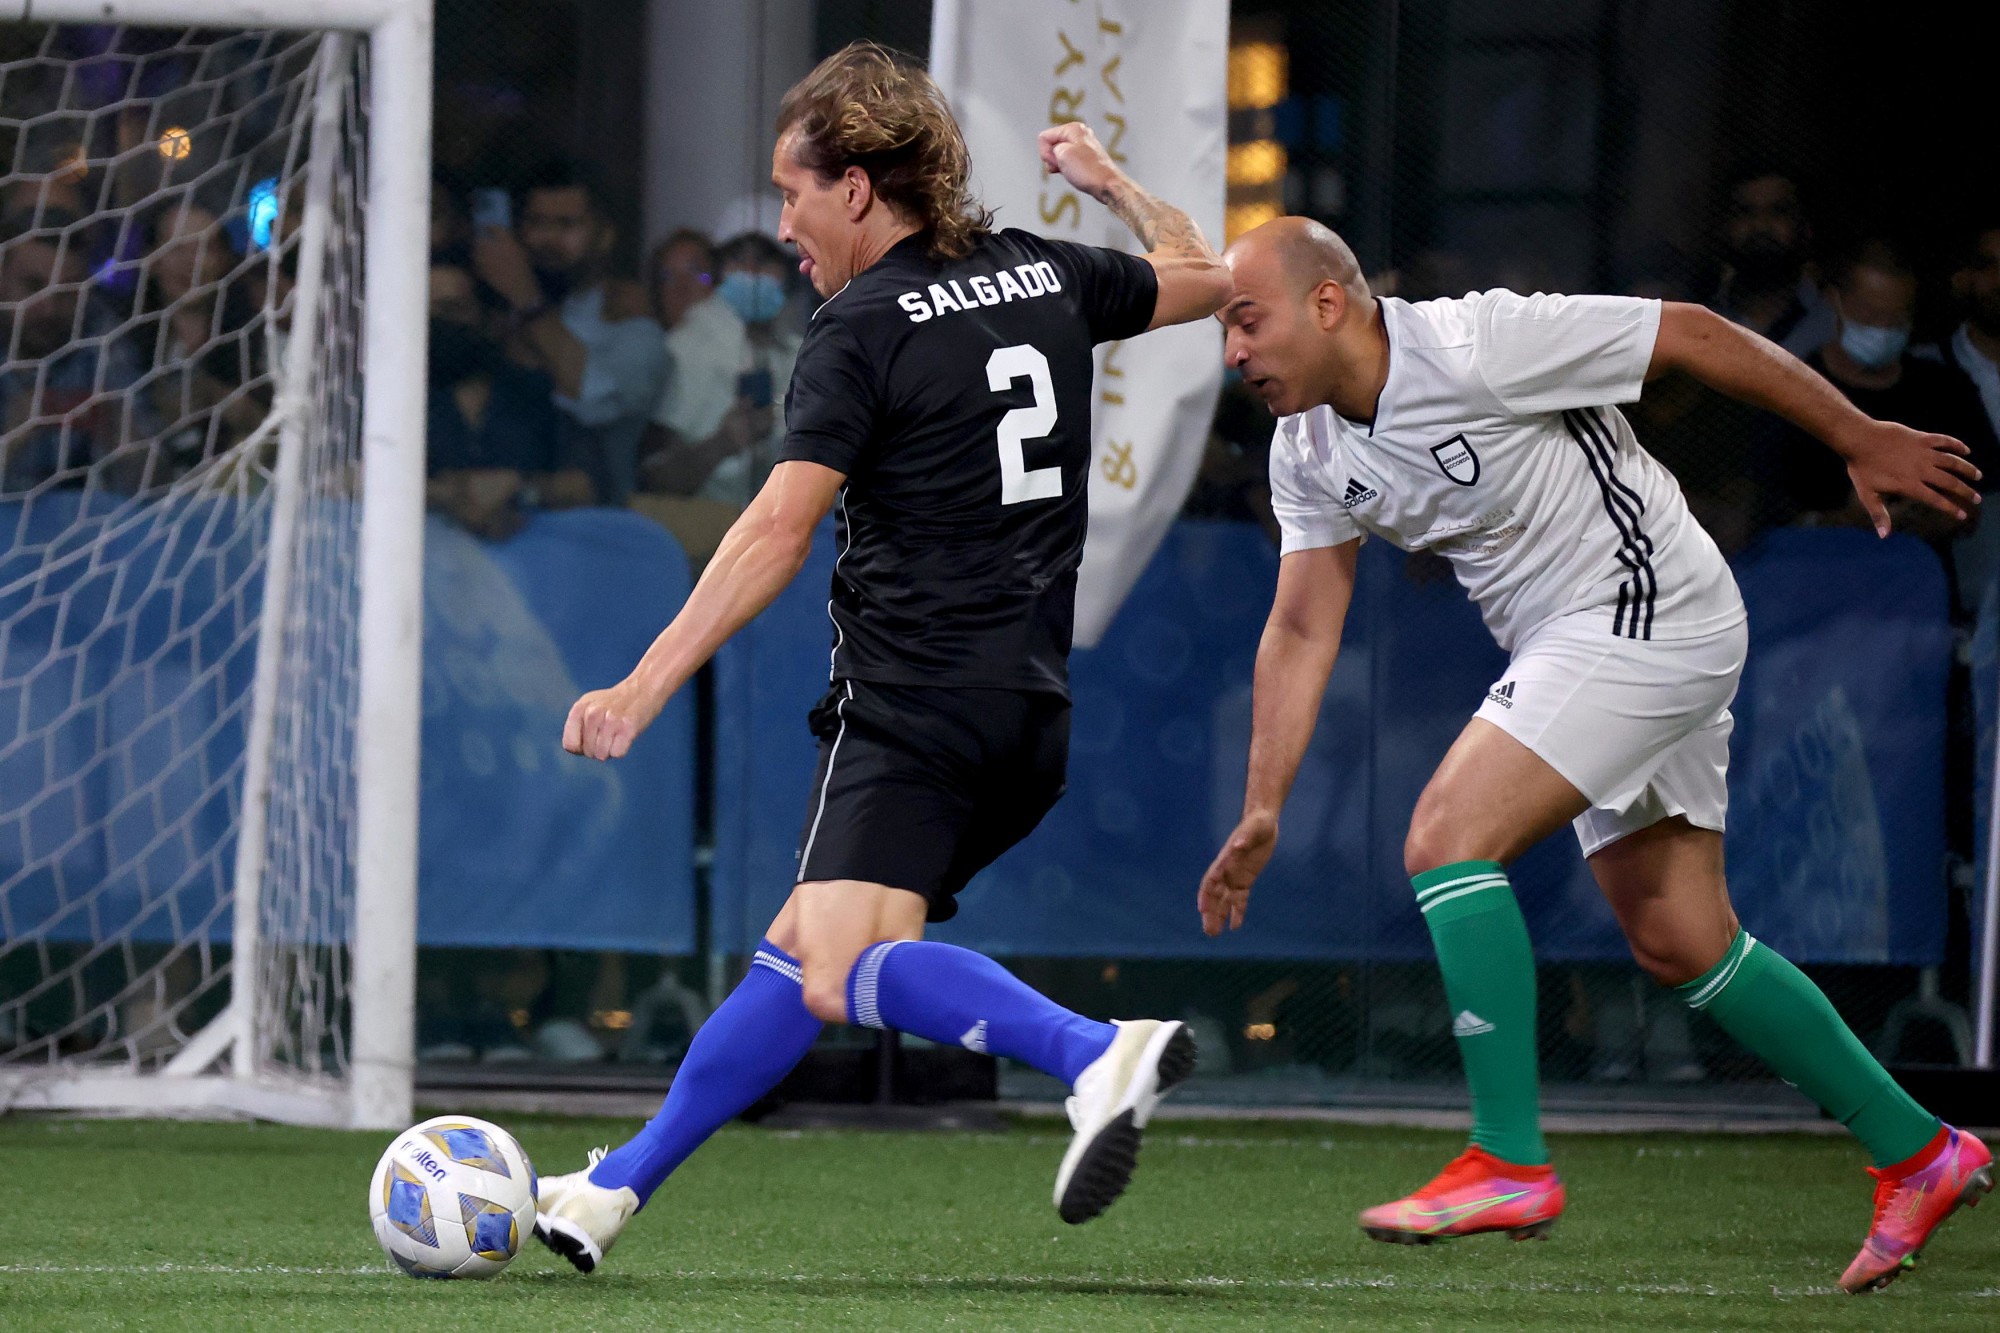 Spanish former footballer and World Classic team member Míchel Salgado (L) in action against Israeli footballer and Abraham Accords team member Tal Ben Haiman (R) during an exhibition match for the Abraham Accords Games at the Sports, Fitne